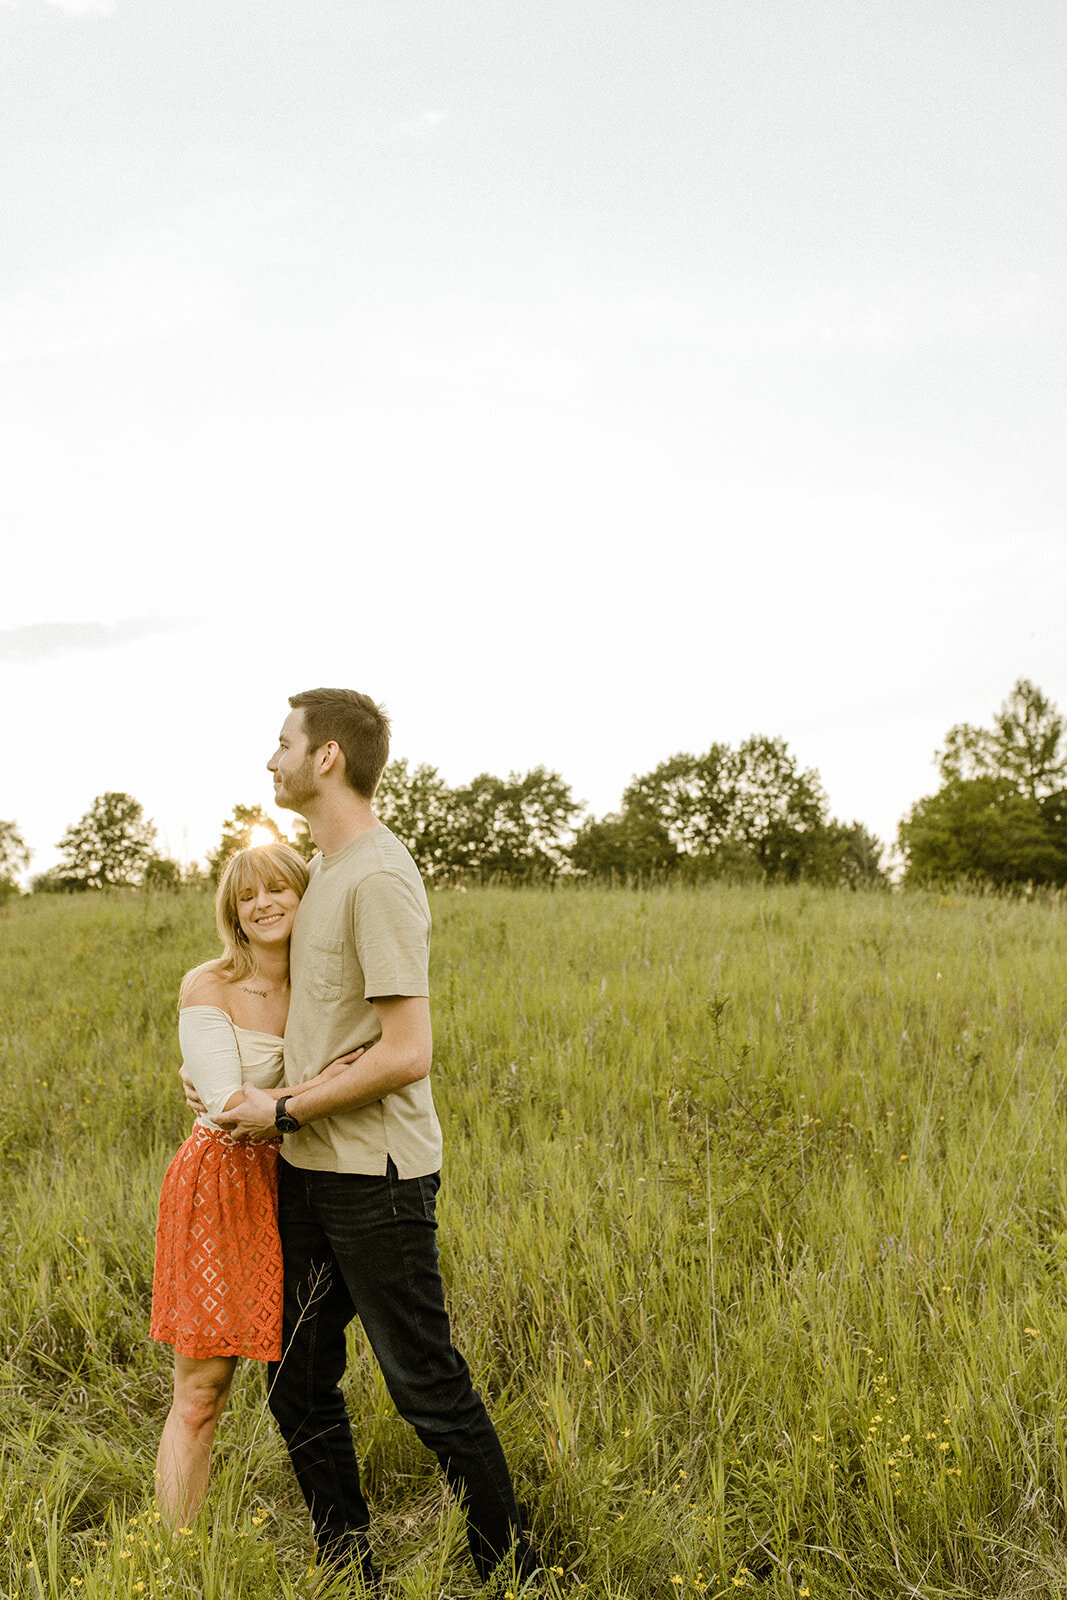 country-cut-flowers-summer-engagement-session-fun-romantic-indie-movie-wanderlust-349